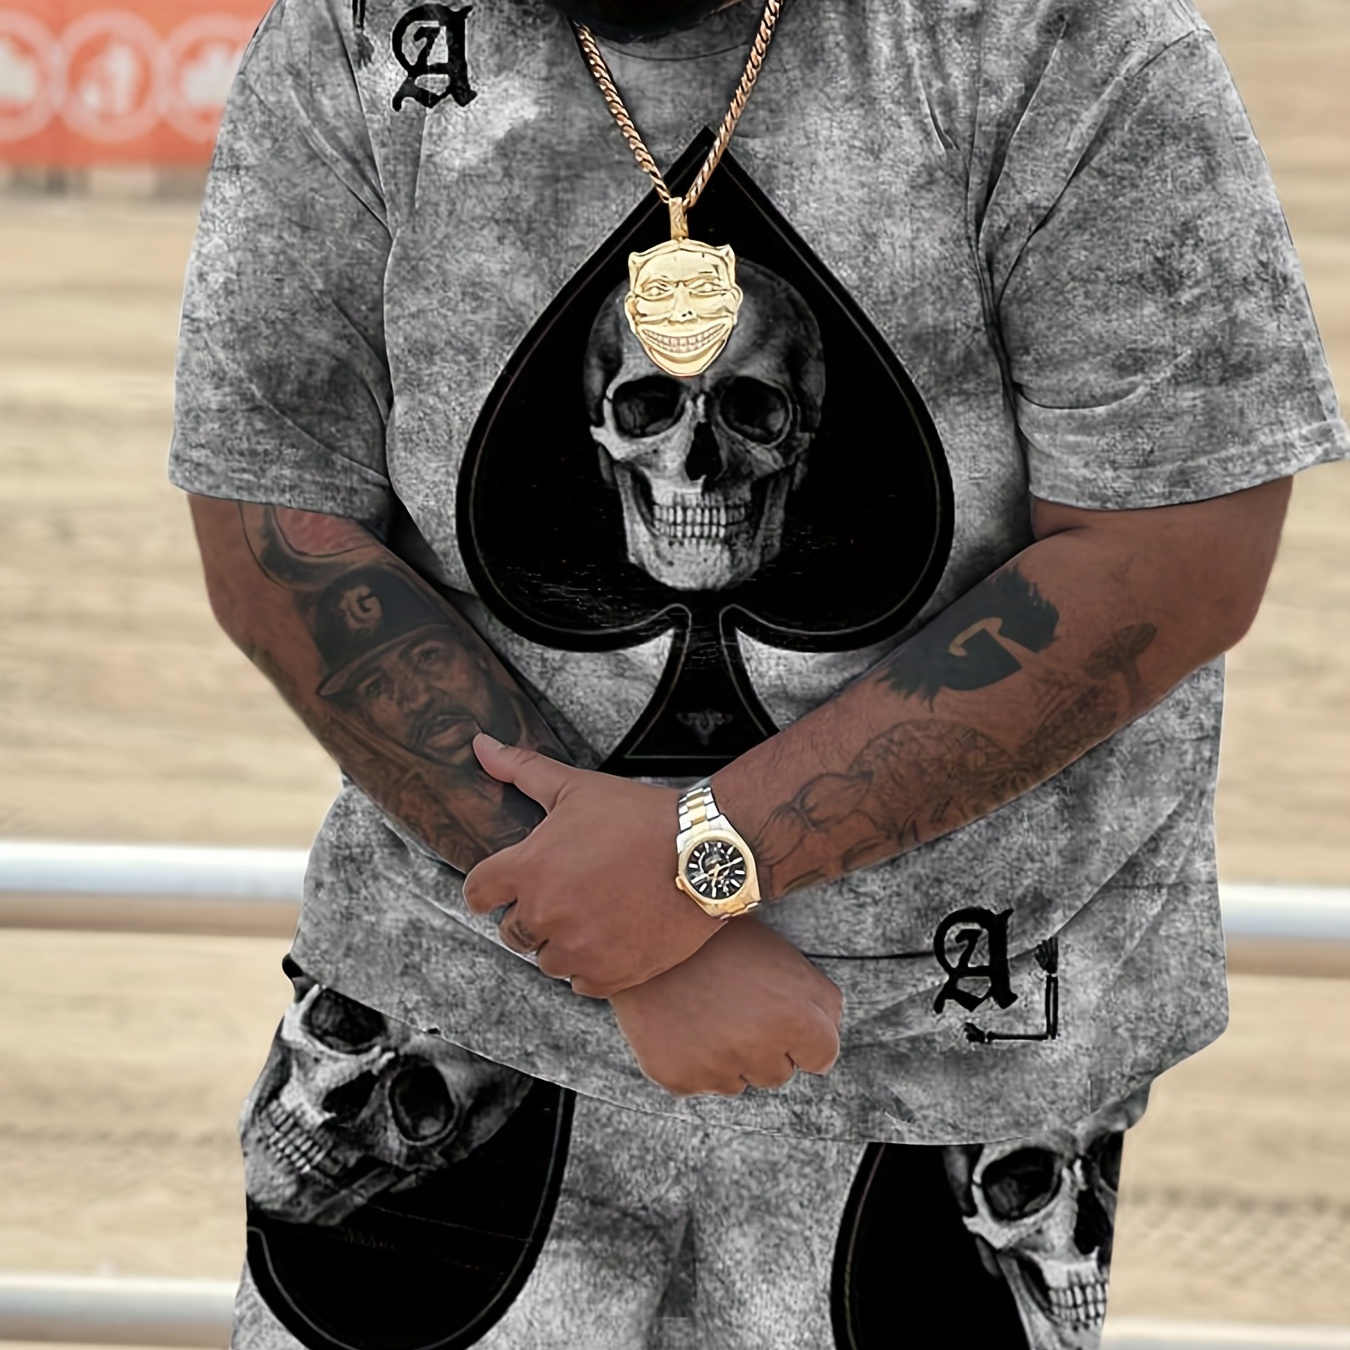 

Plus Size Men's Skull & Spade Graphic Print T-shirt Shorts Set For Summer, Street Style Clothing For Big & Tall Males